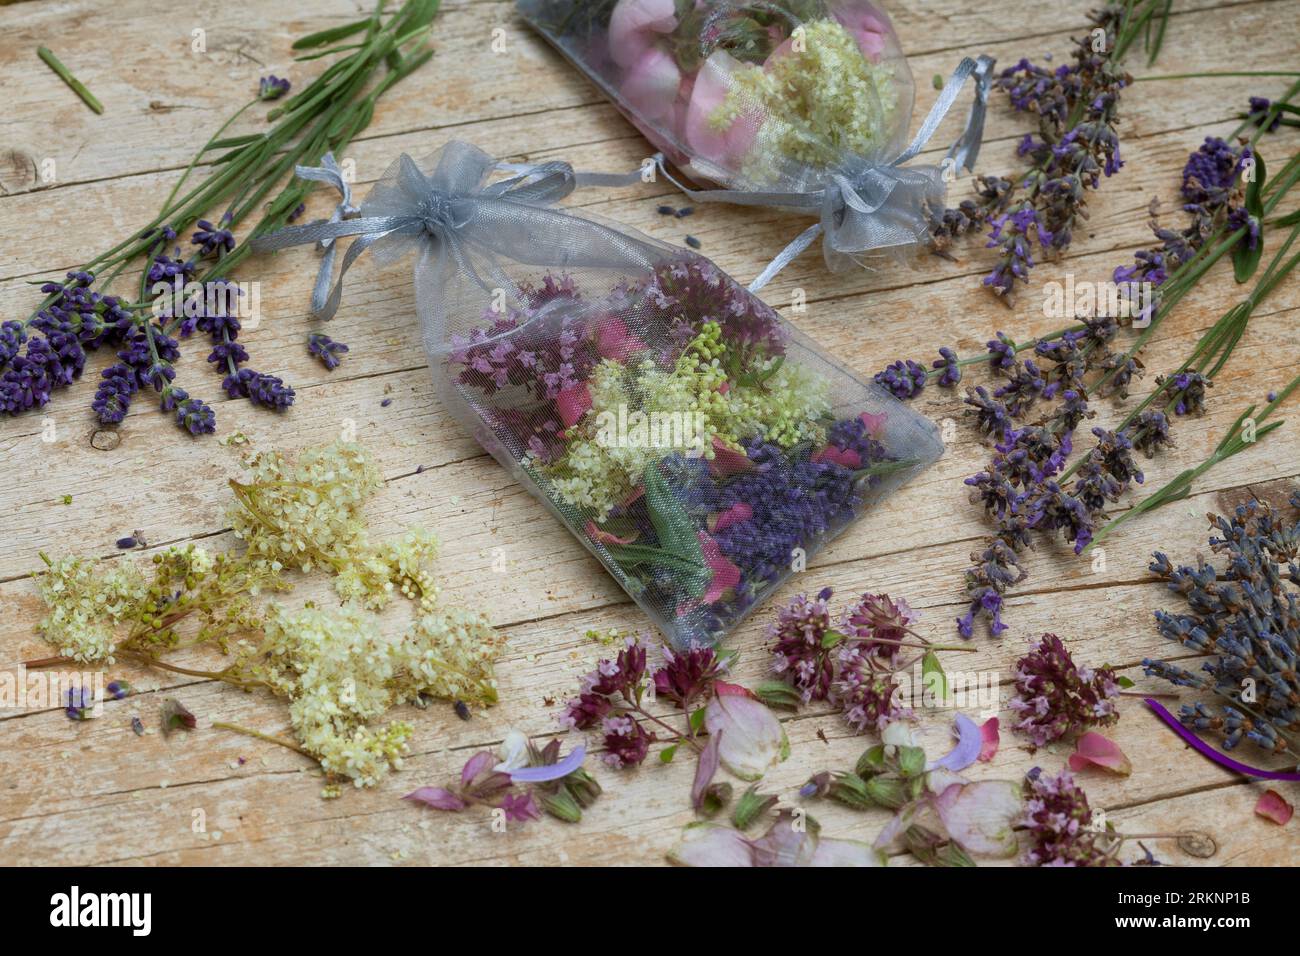 selfmade scented sachets, different scented plants a put in gauze sacs: lavender, rose flowers, Meadow Sweet, Marjoram and Hyssop Stock Photo